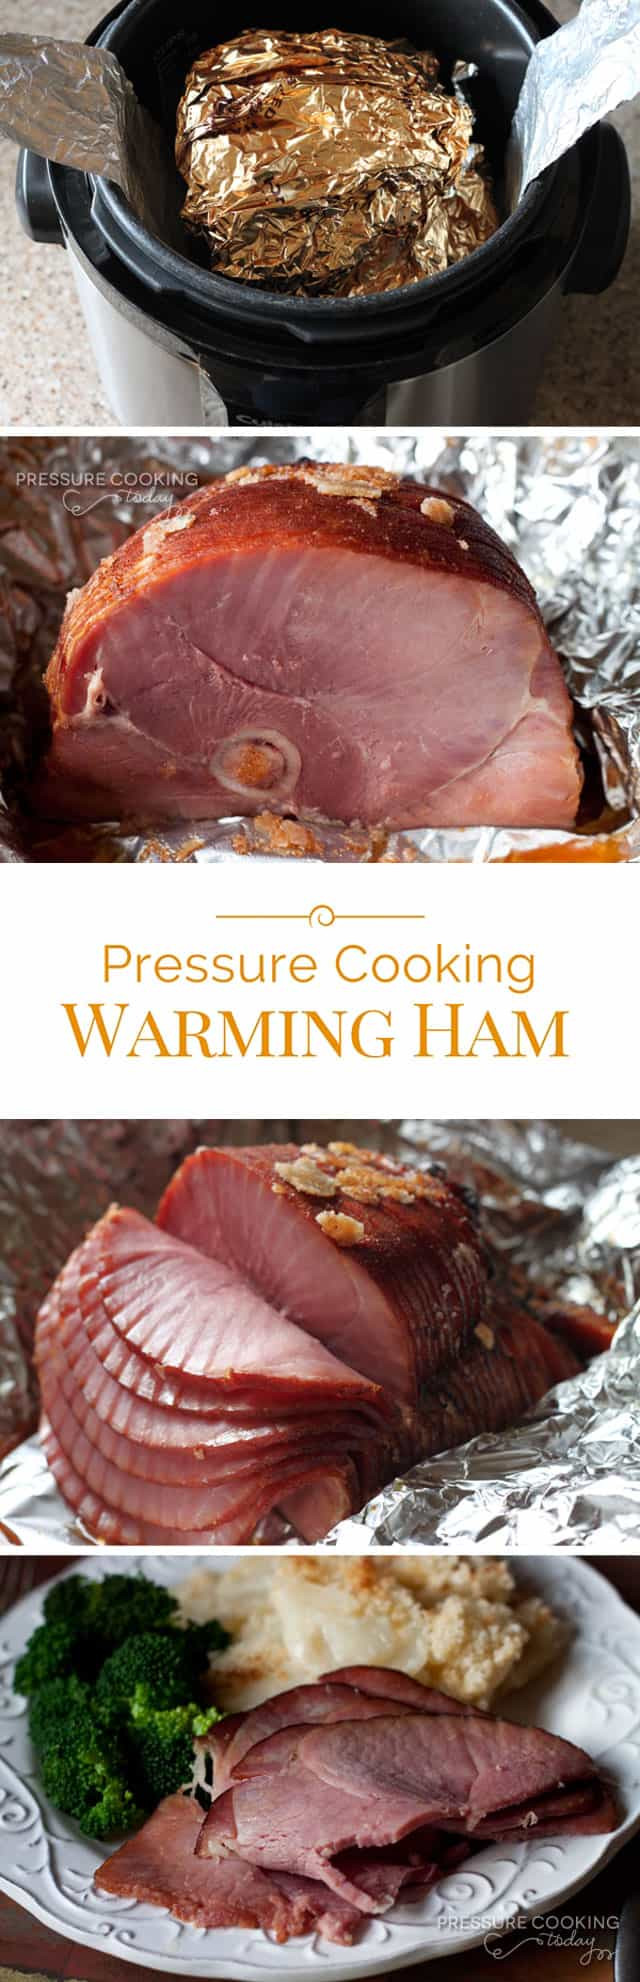 Pressure Cooked Ham Recipes
 Heating Ham Slices in the Pressure Cooker